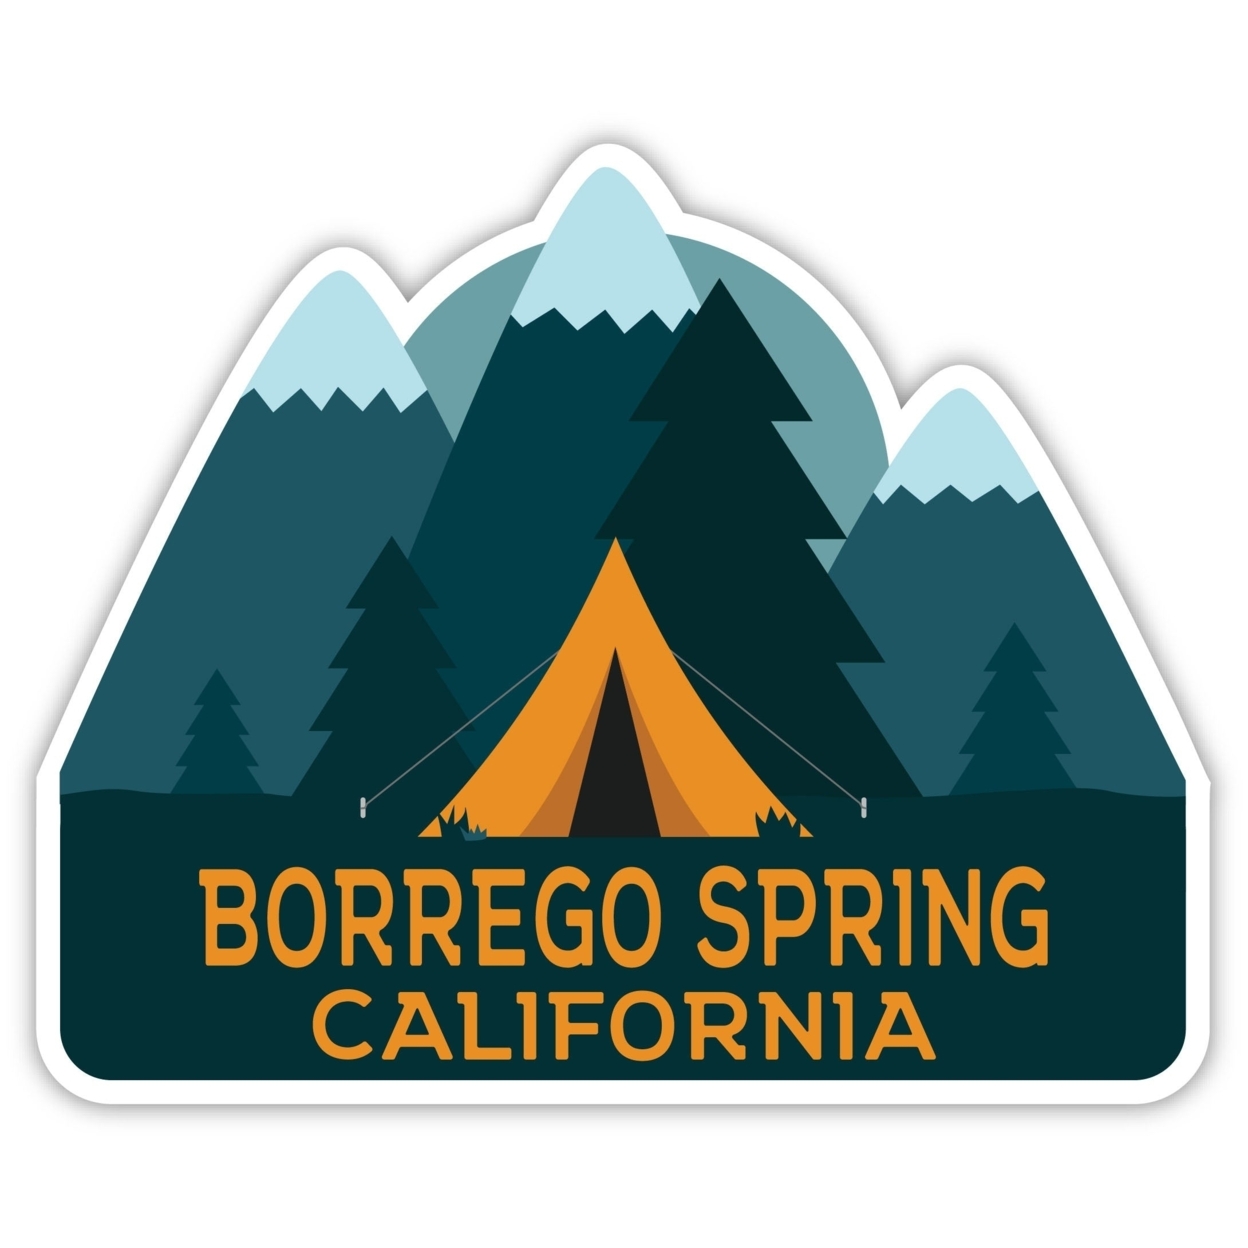 Borrego Spring California Souvenir Decorative Stickers (Choose Theme And Size) - 4-Pack, 6-Inch, Tent